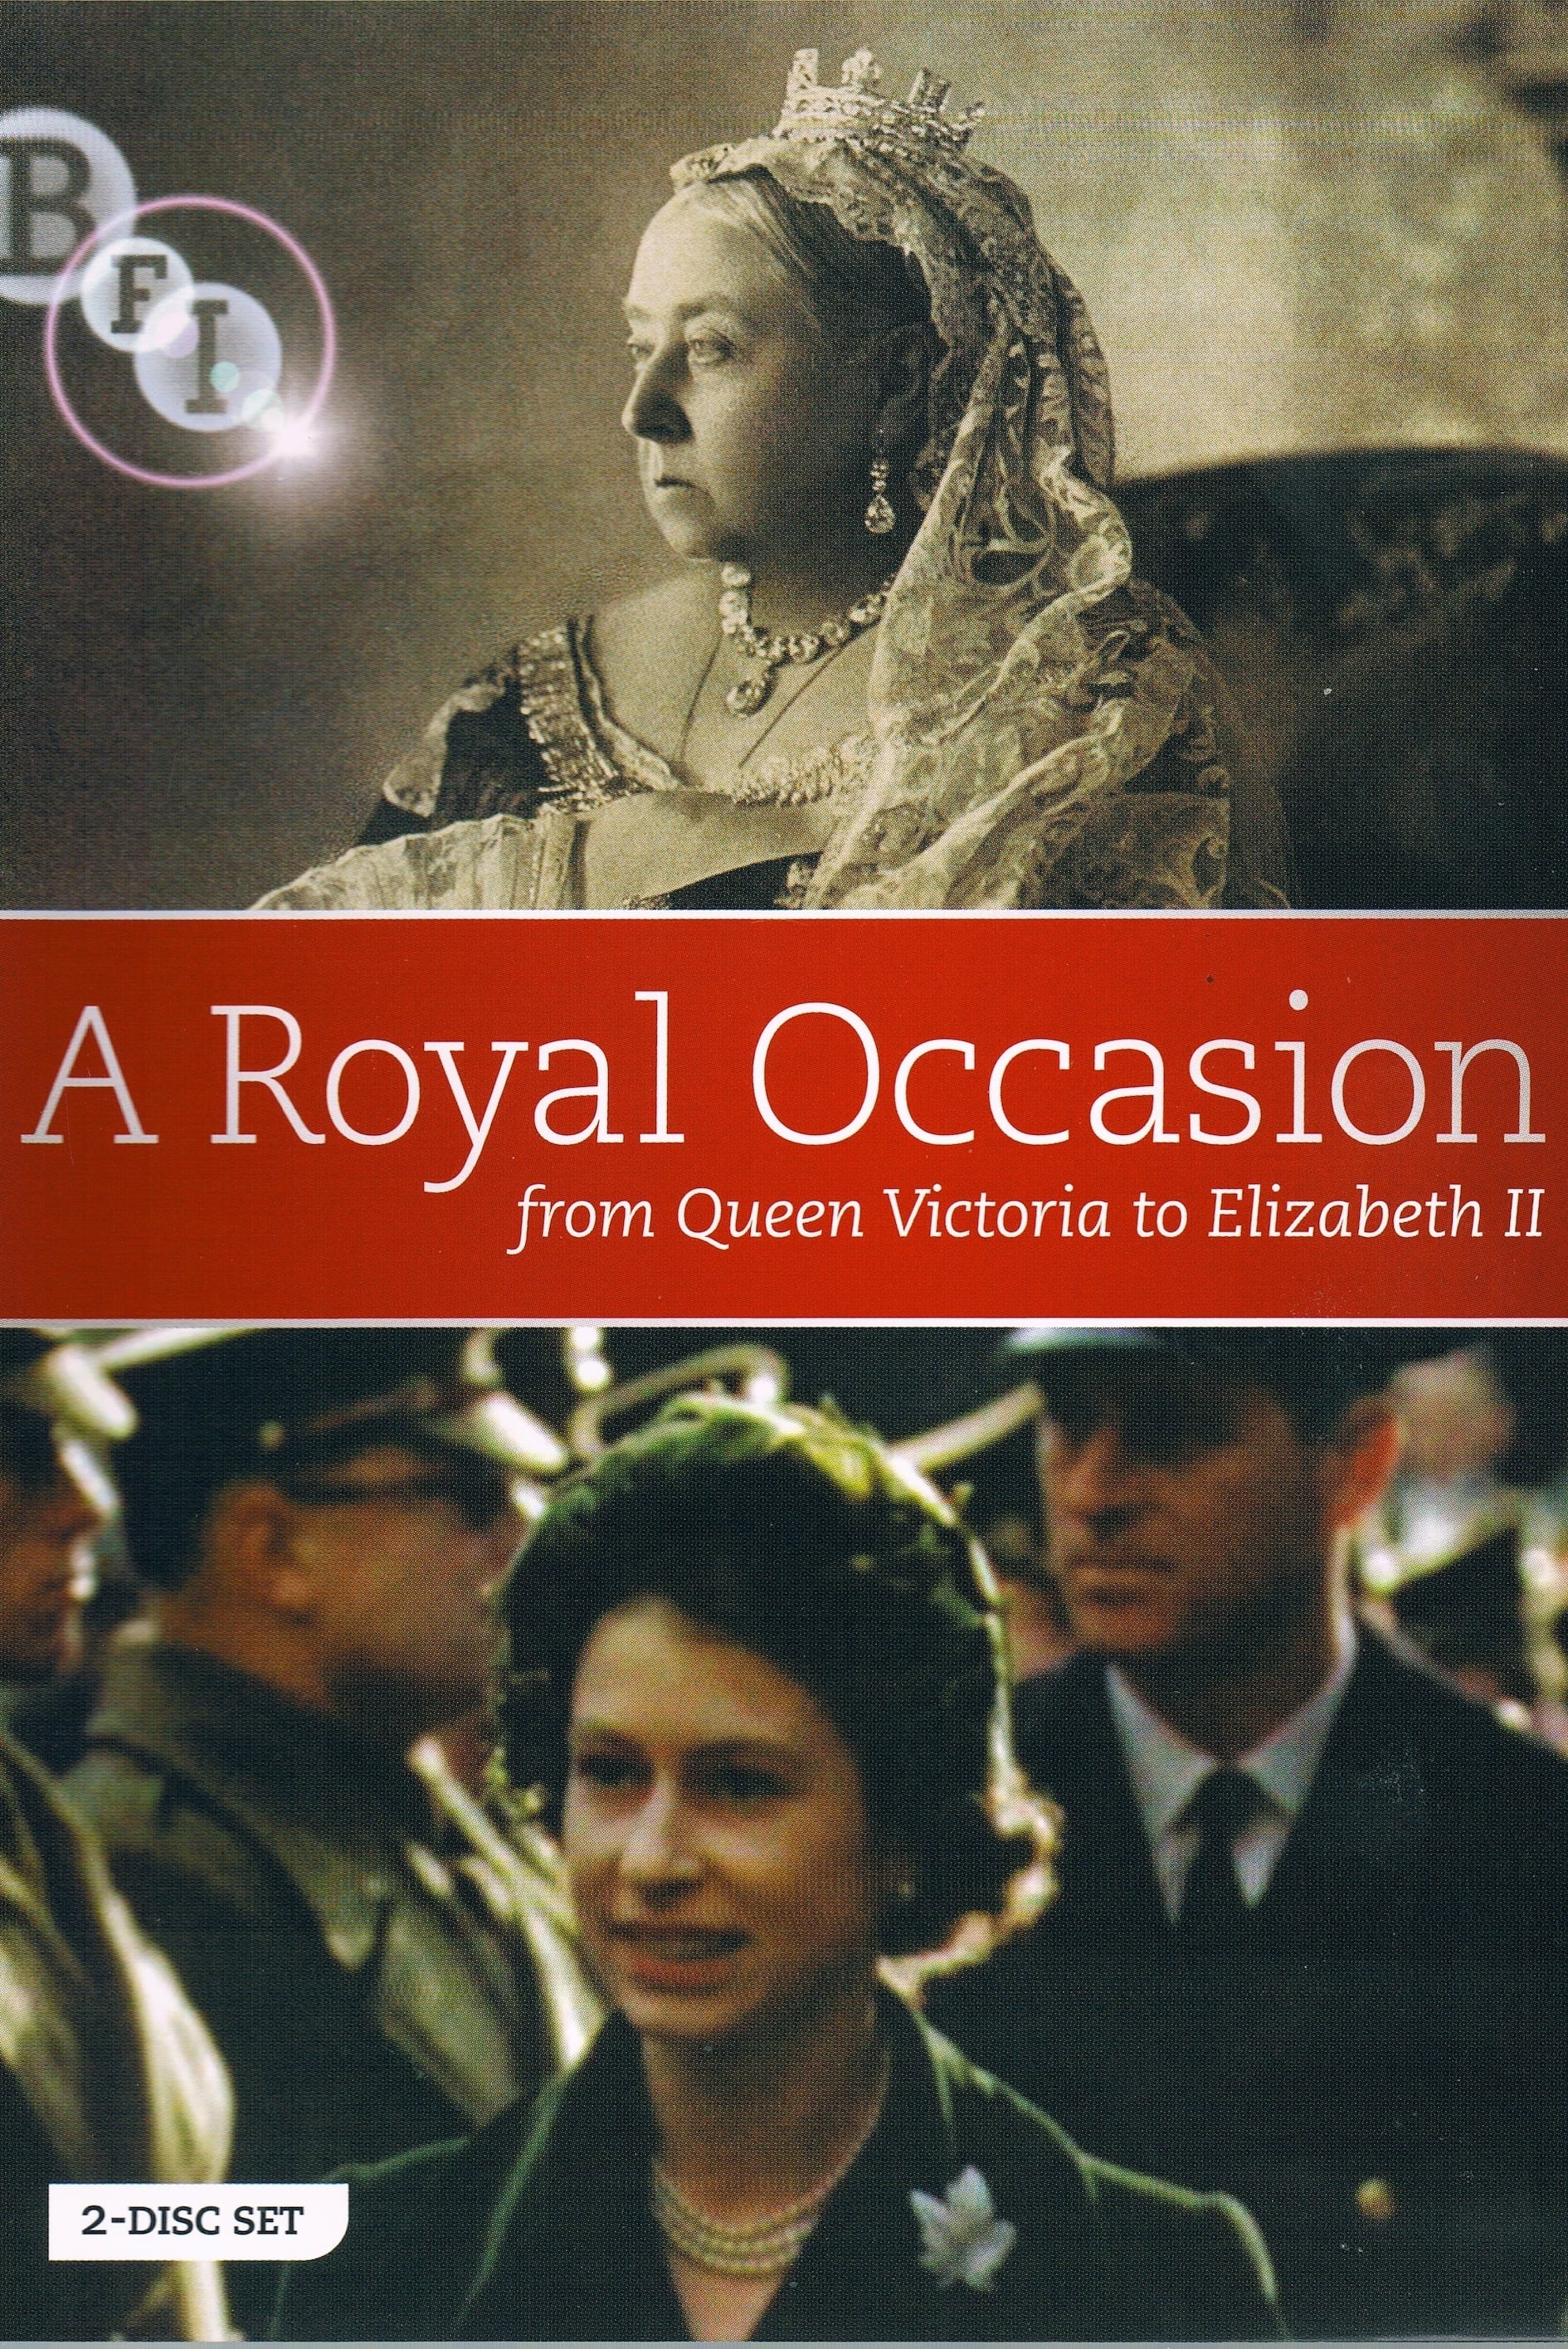 Coronation of Their Majesties King George VI and Queen Elizabeth